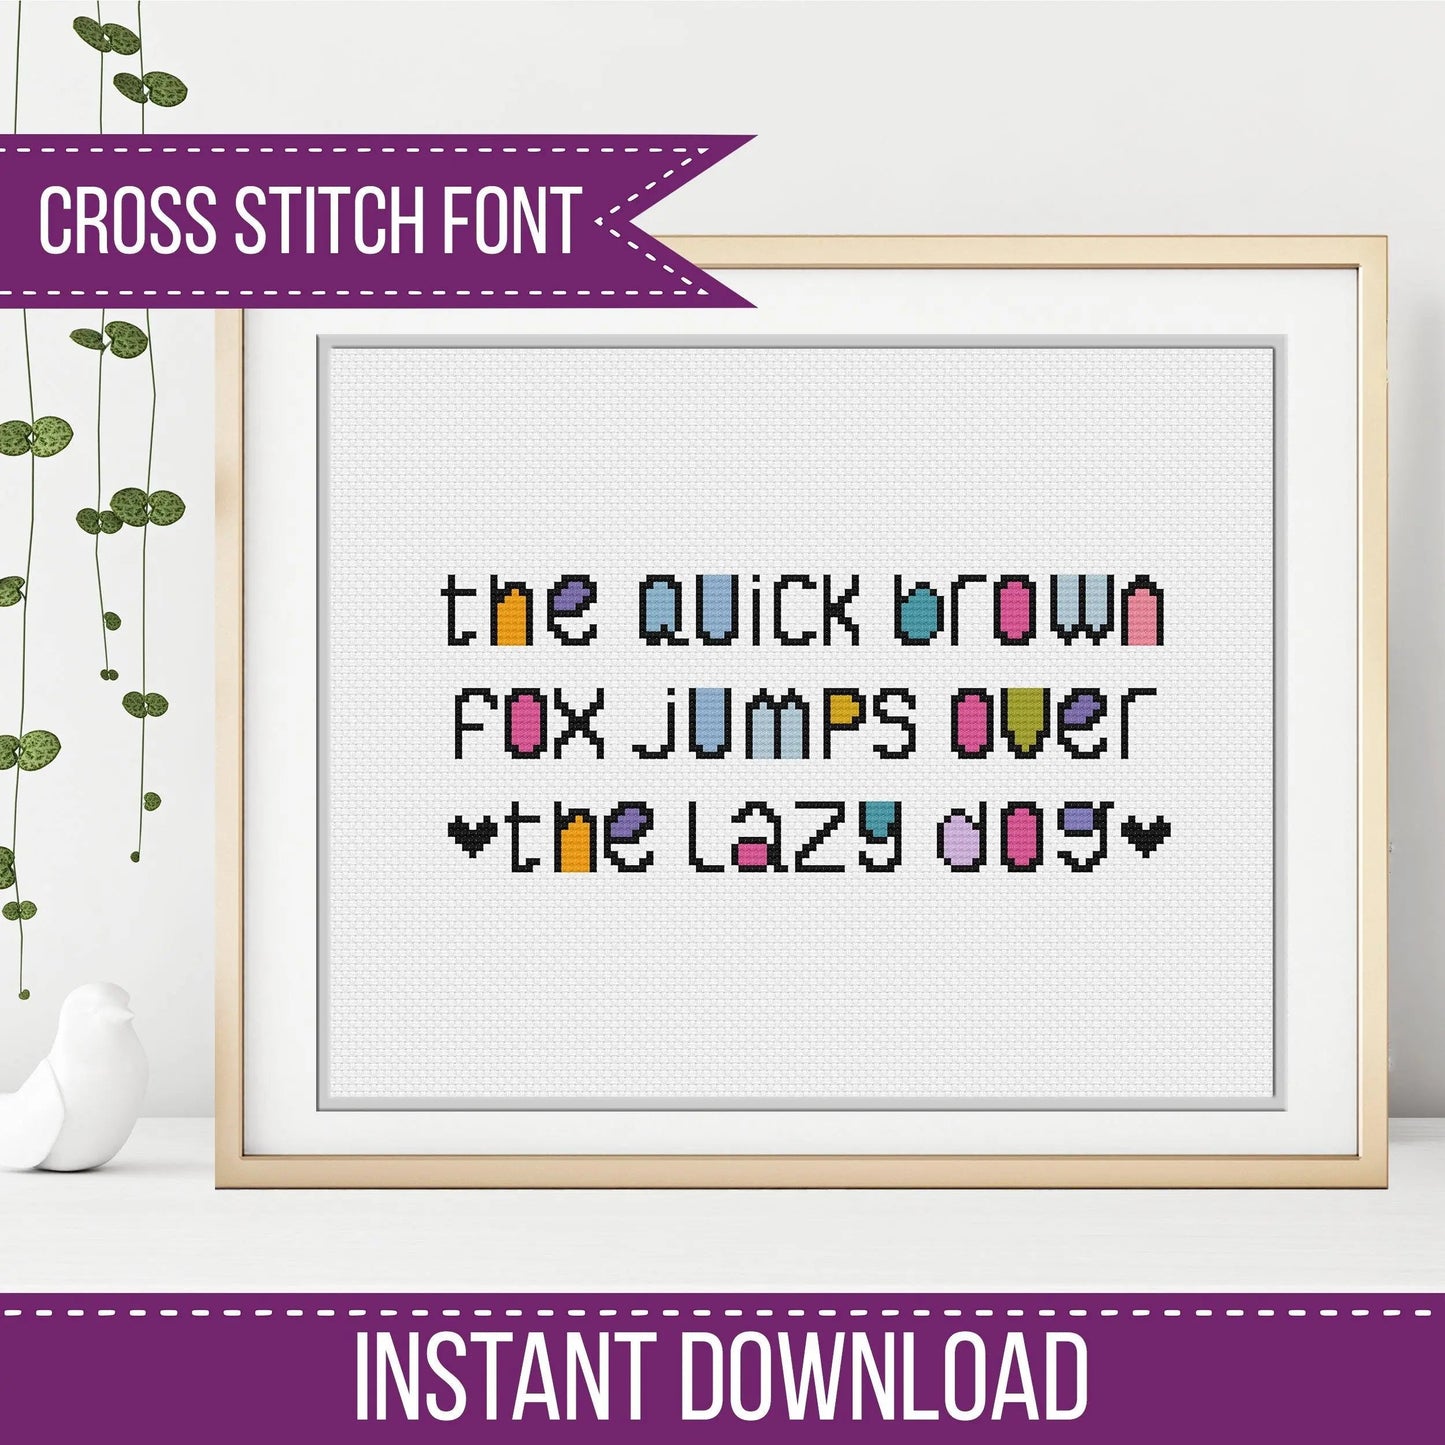 Whimsical Font - Cross Stitch Font by Peppermint Purple